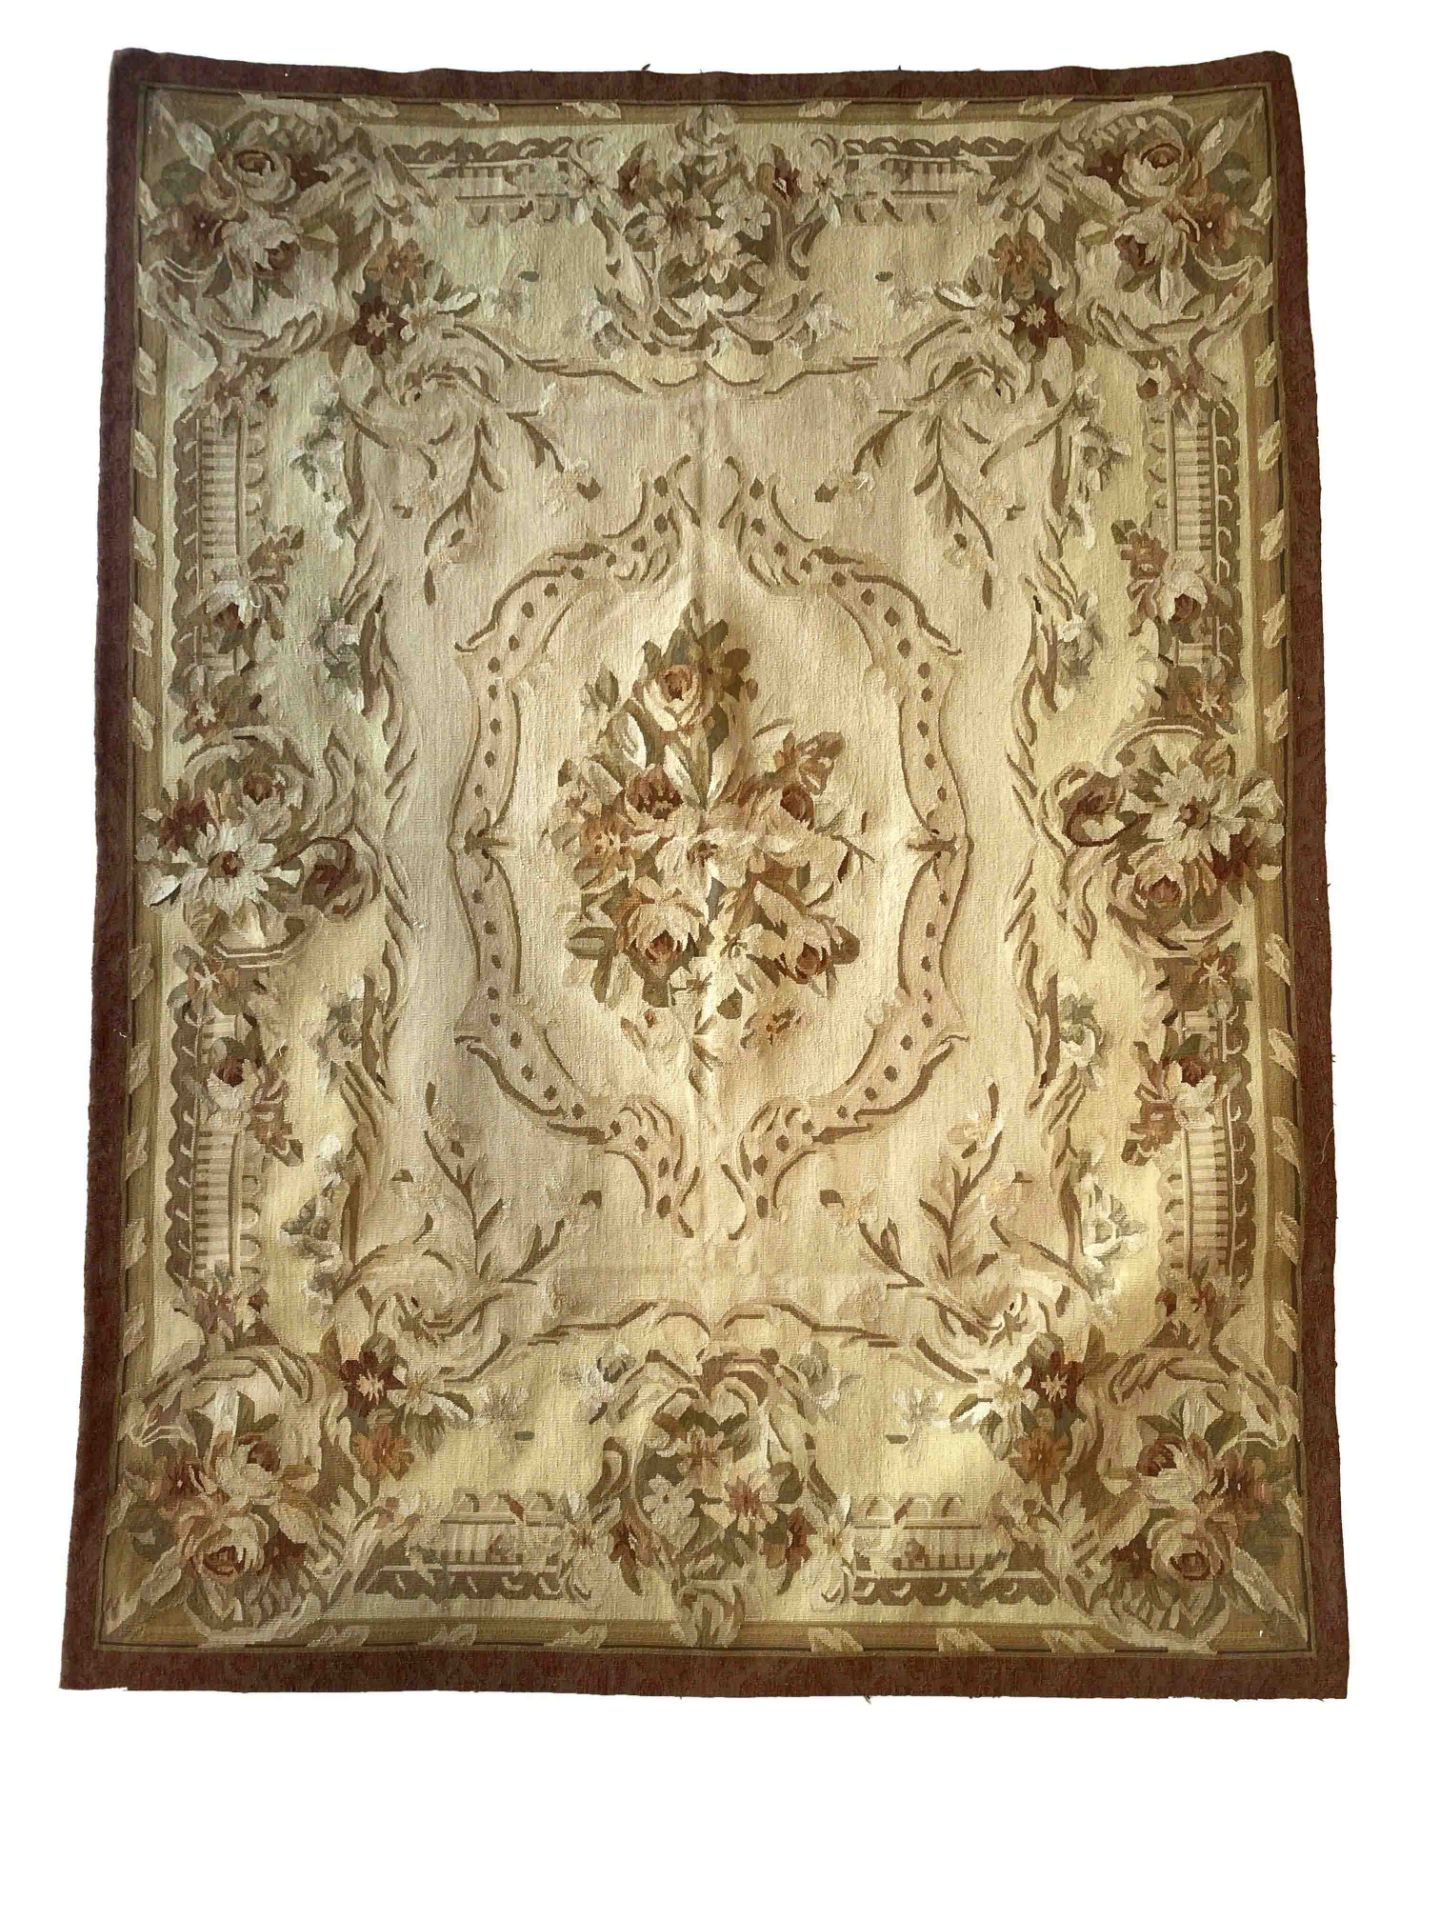 Carpet, Aubusson, good condition with minor wear, 185 x 120 cm - The carpet can only be viewed and